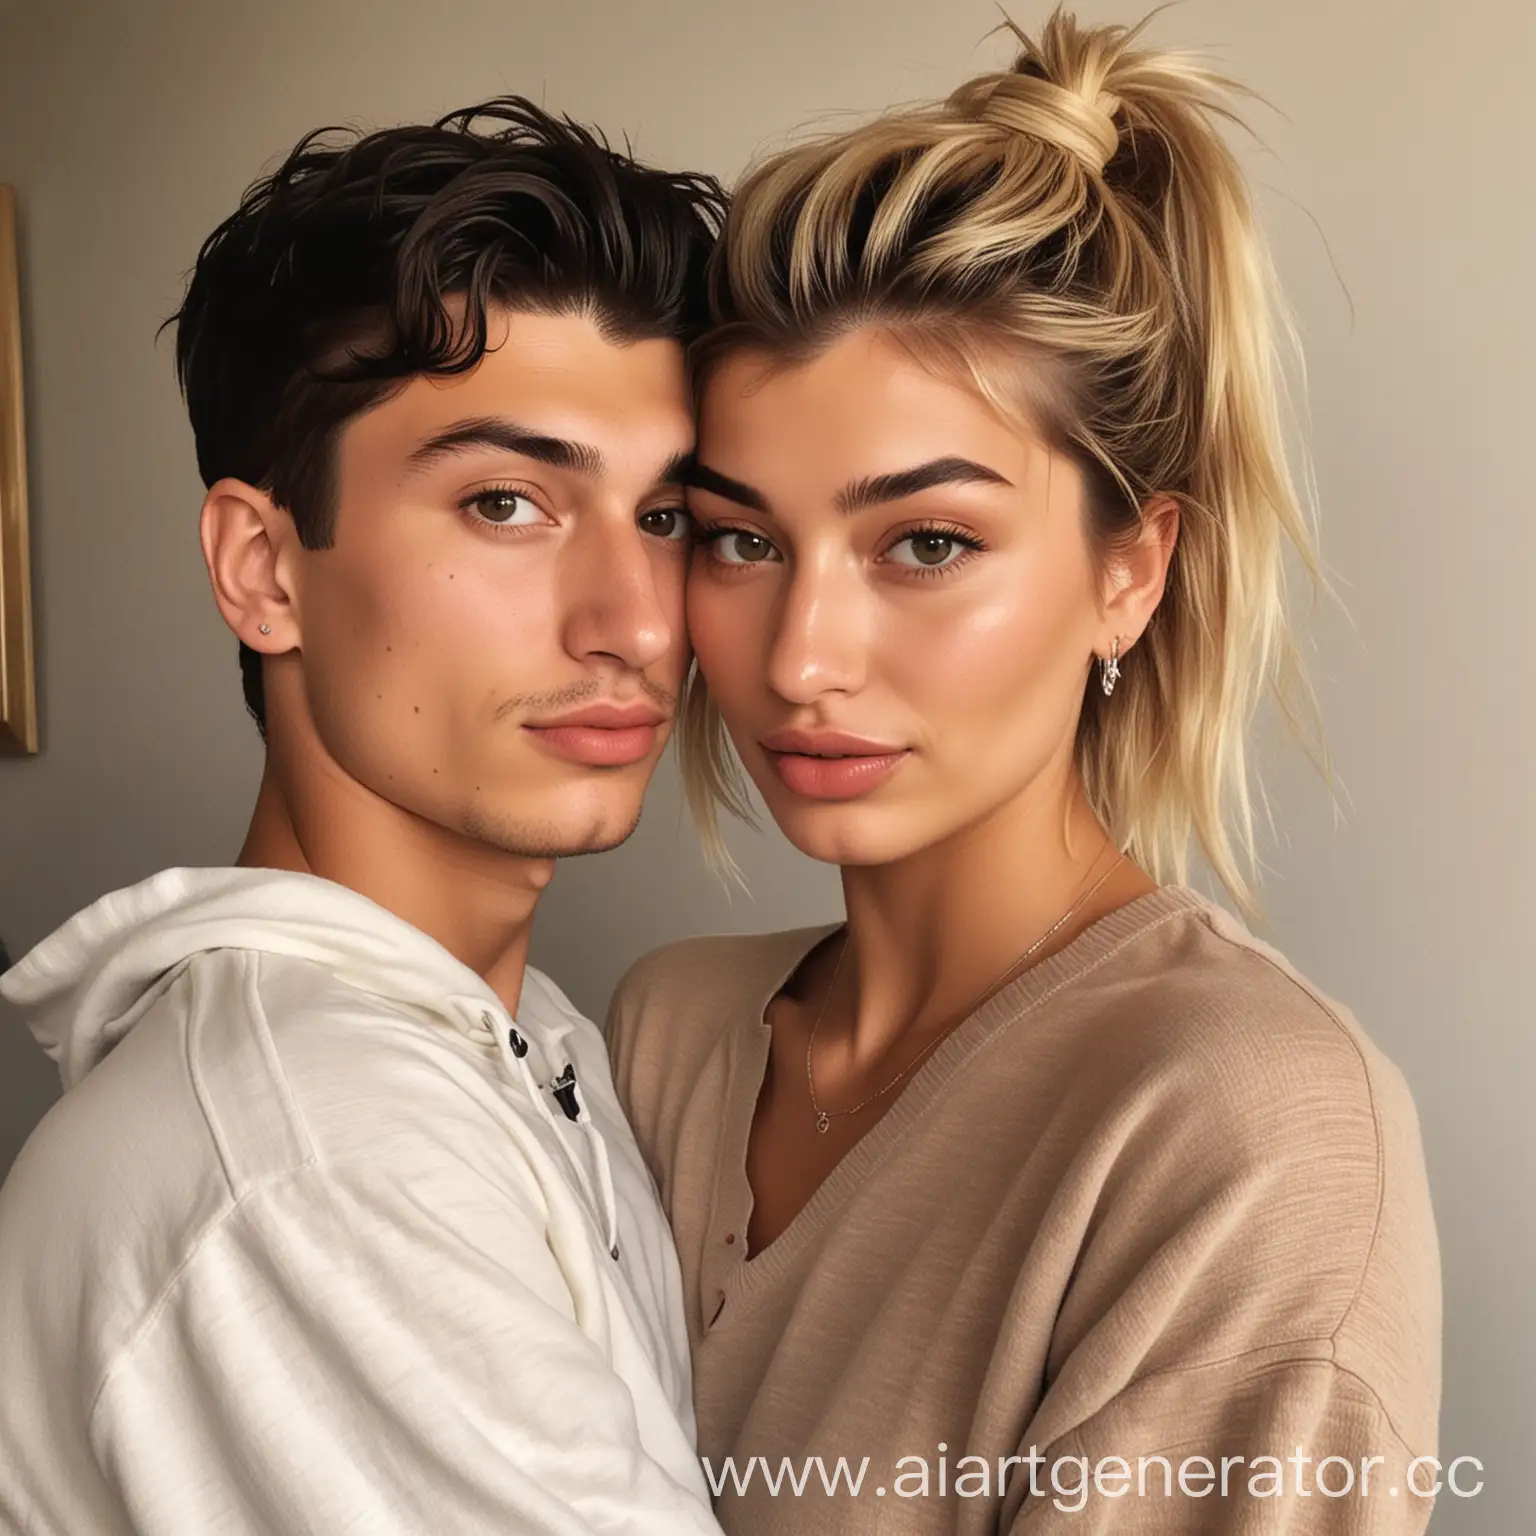 A breathtakingly realistic selfie of Hailey Baldwin, hugs a young boy. The boy, who appears to be around 18 years old, boy has dark hair and his hair is combed back and Hailey kiss his cheek,